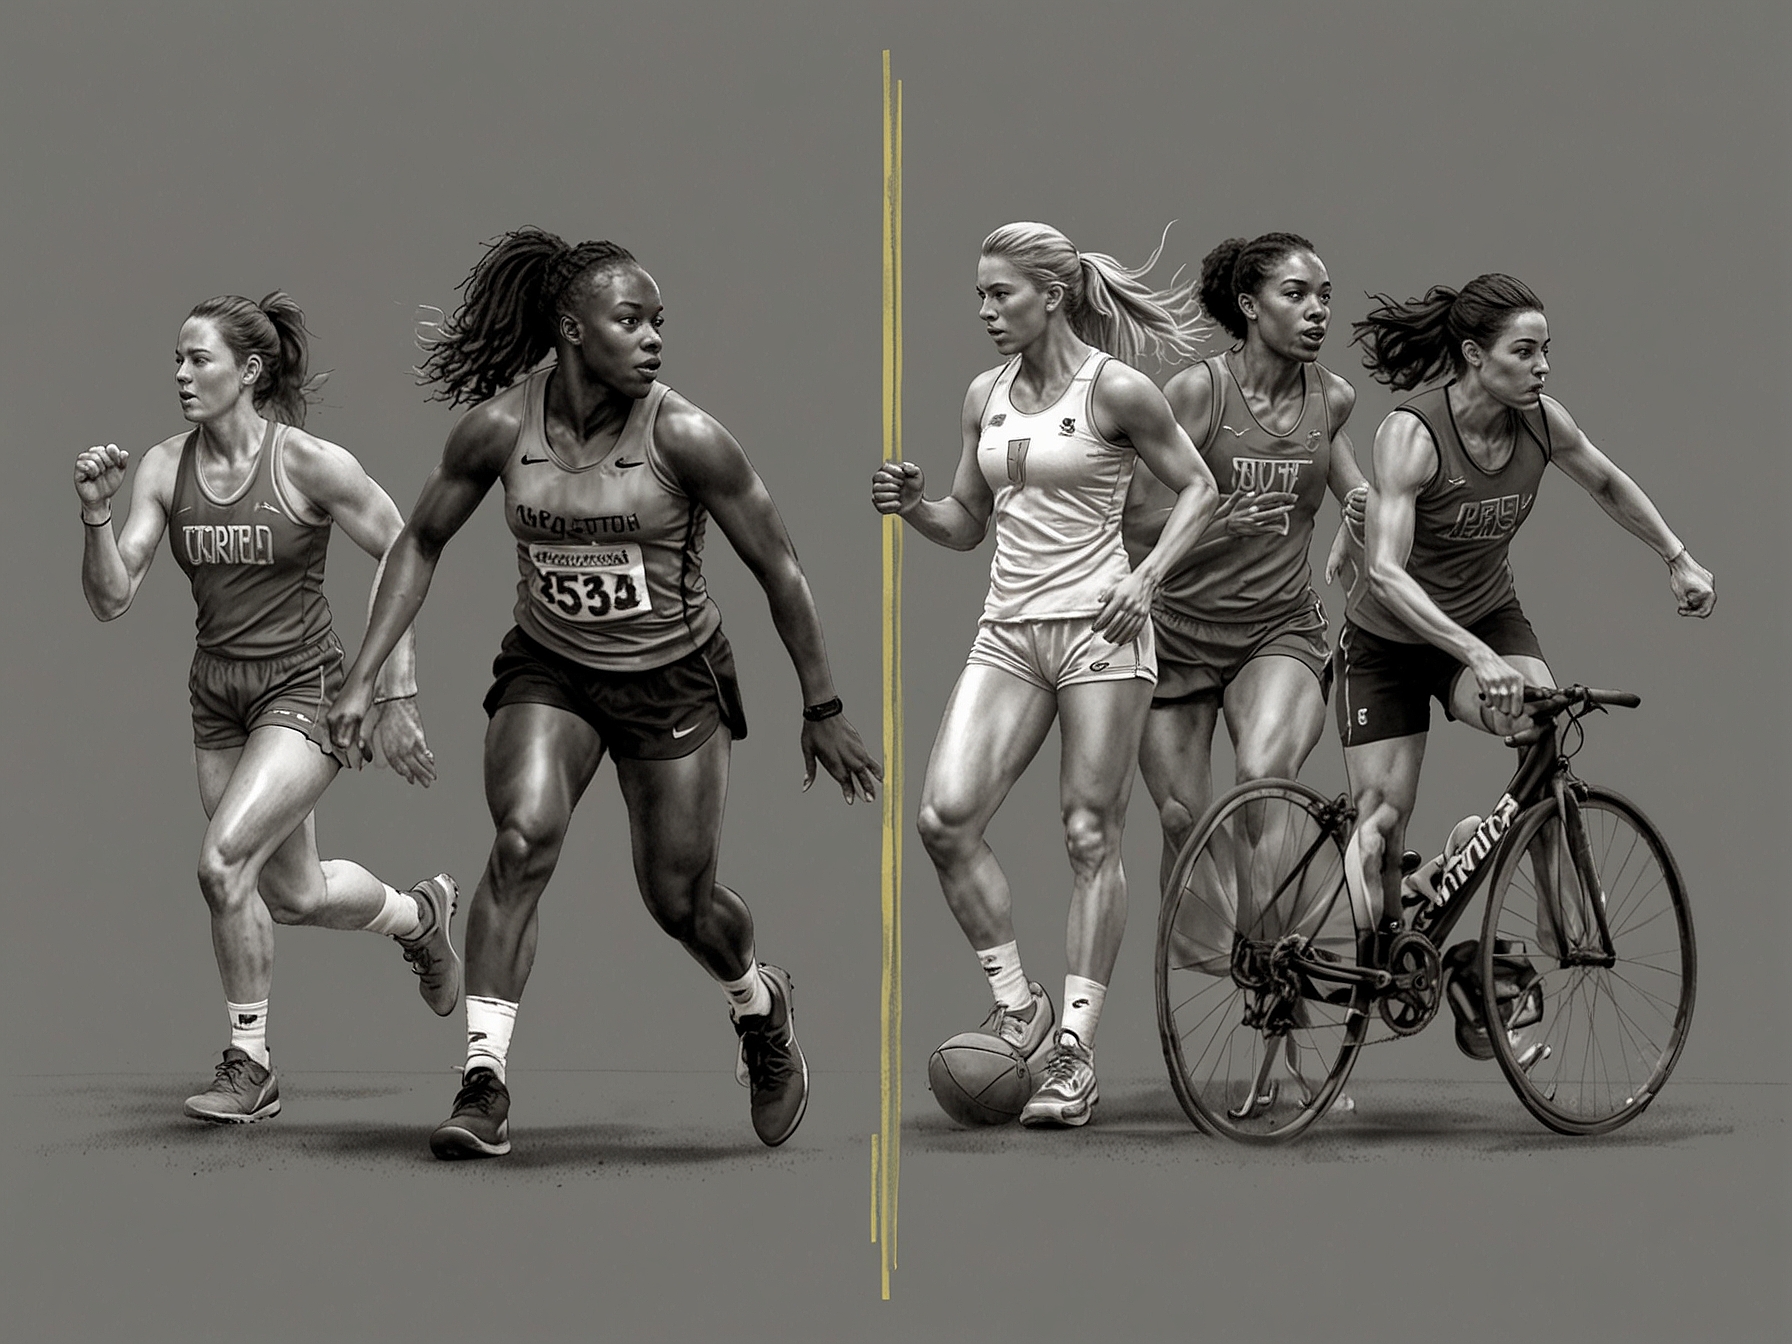 A split image showing transgender athletes on one side and traditional female athletes on the other, symbolizing the ongoing debate about inclusion and fairness in competitive sports.